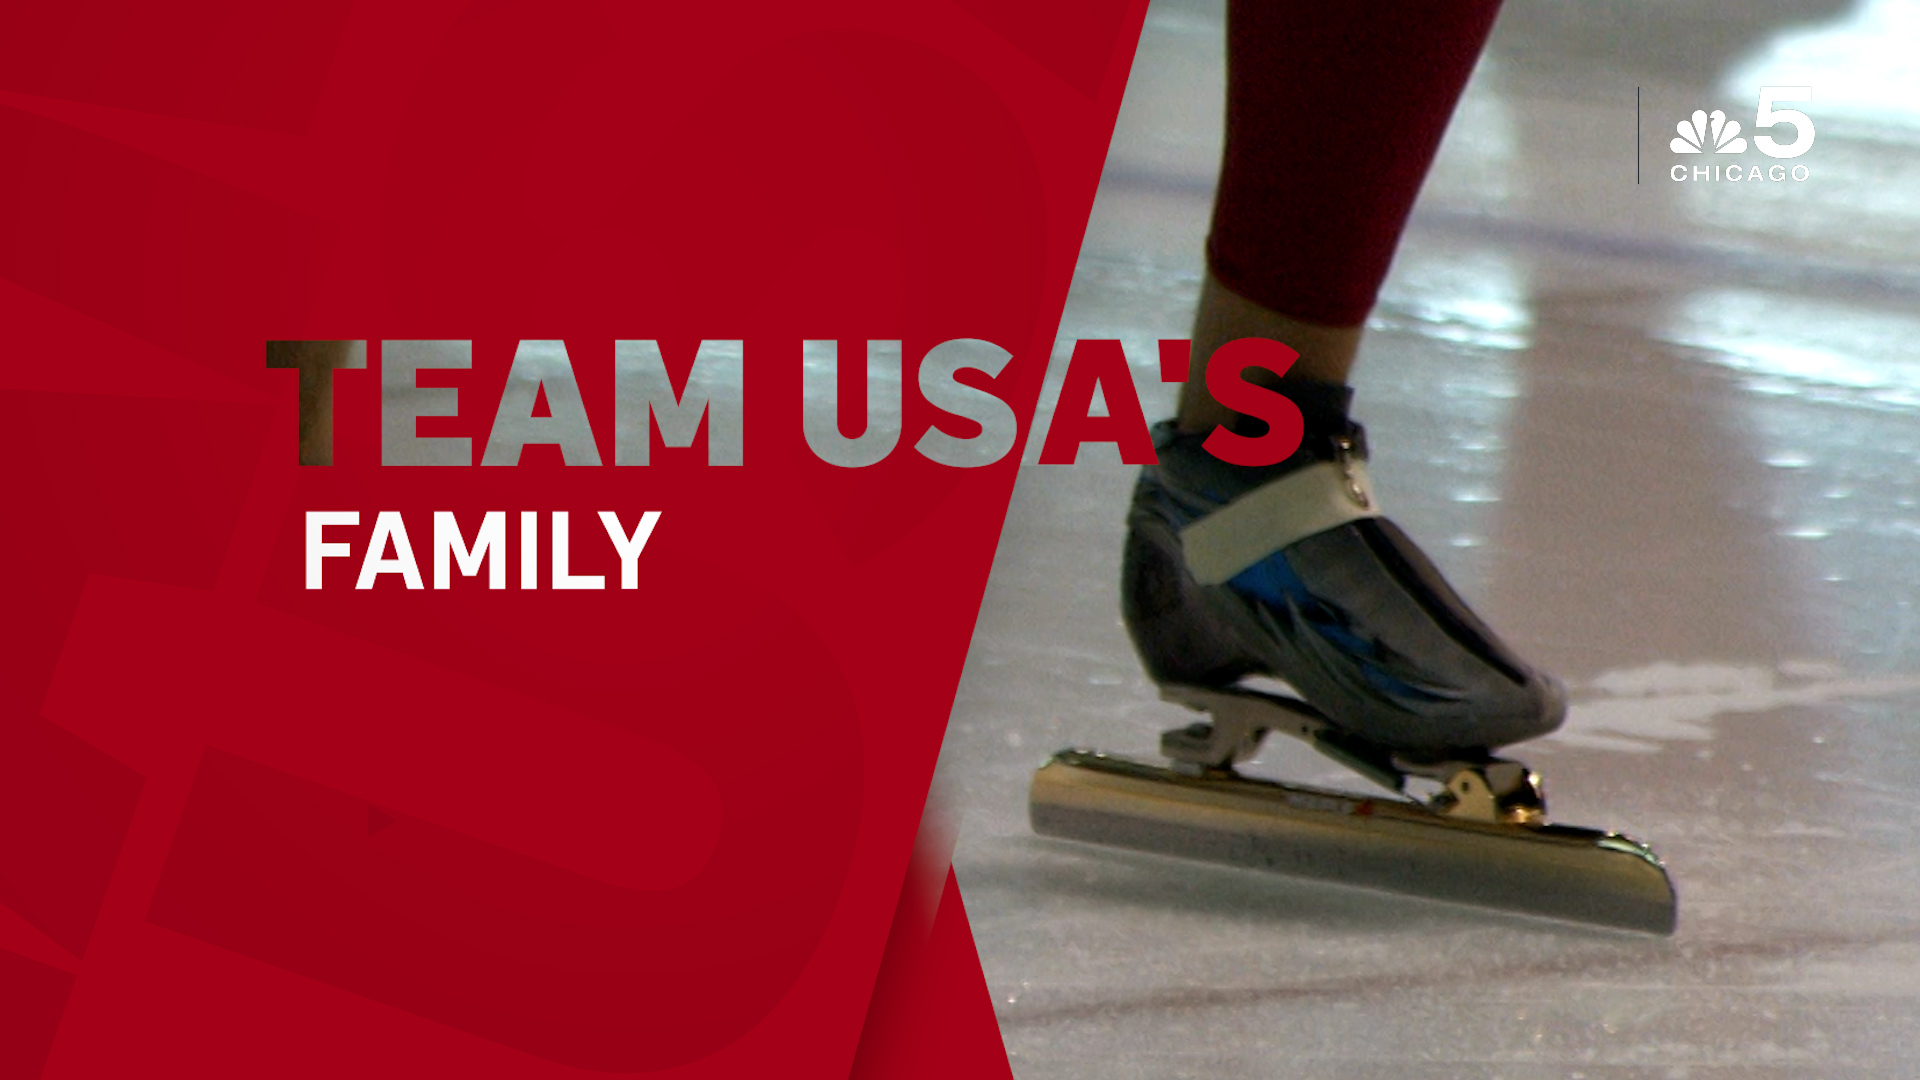 Quest for Gold: Emery Lehman - 2018 Winter Olympic speed skater